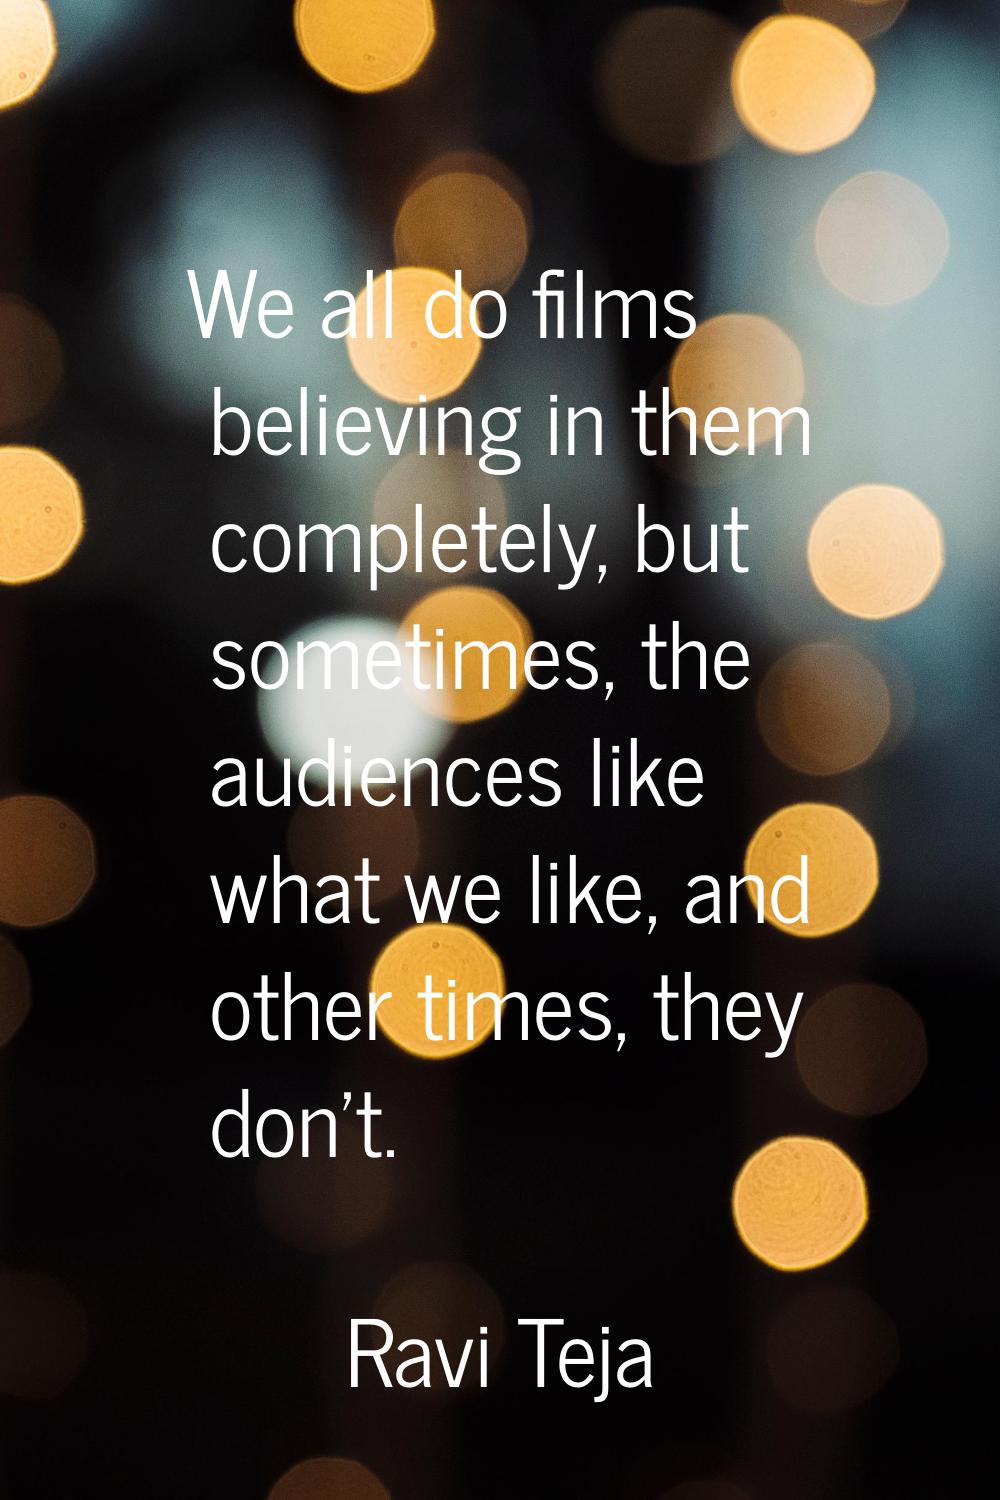 We all do films believing in them completely, but sometimes, the audiences like what we like, and o